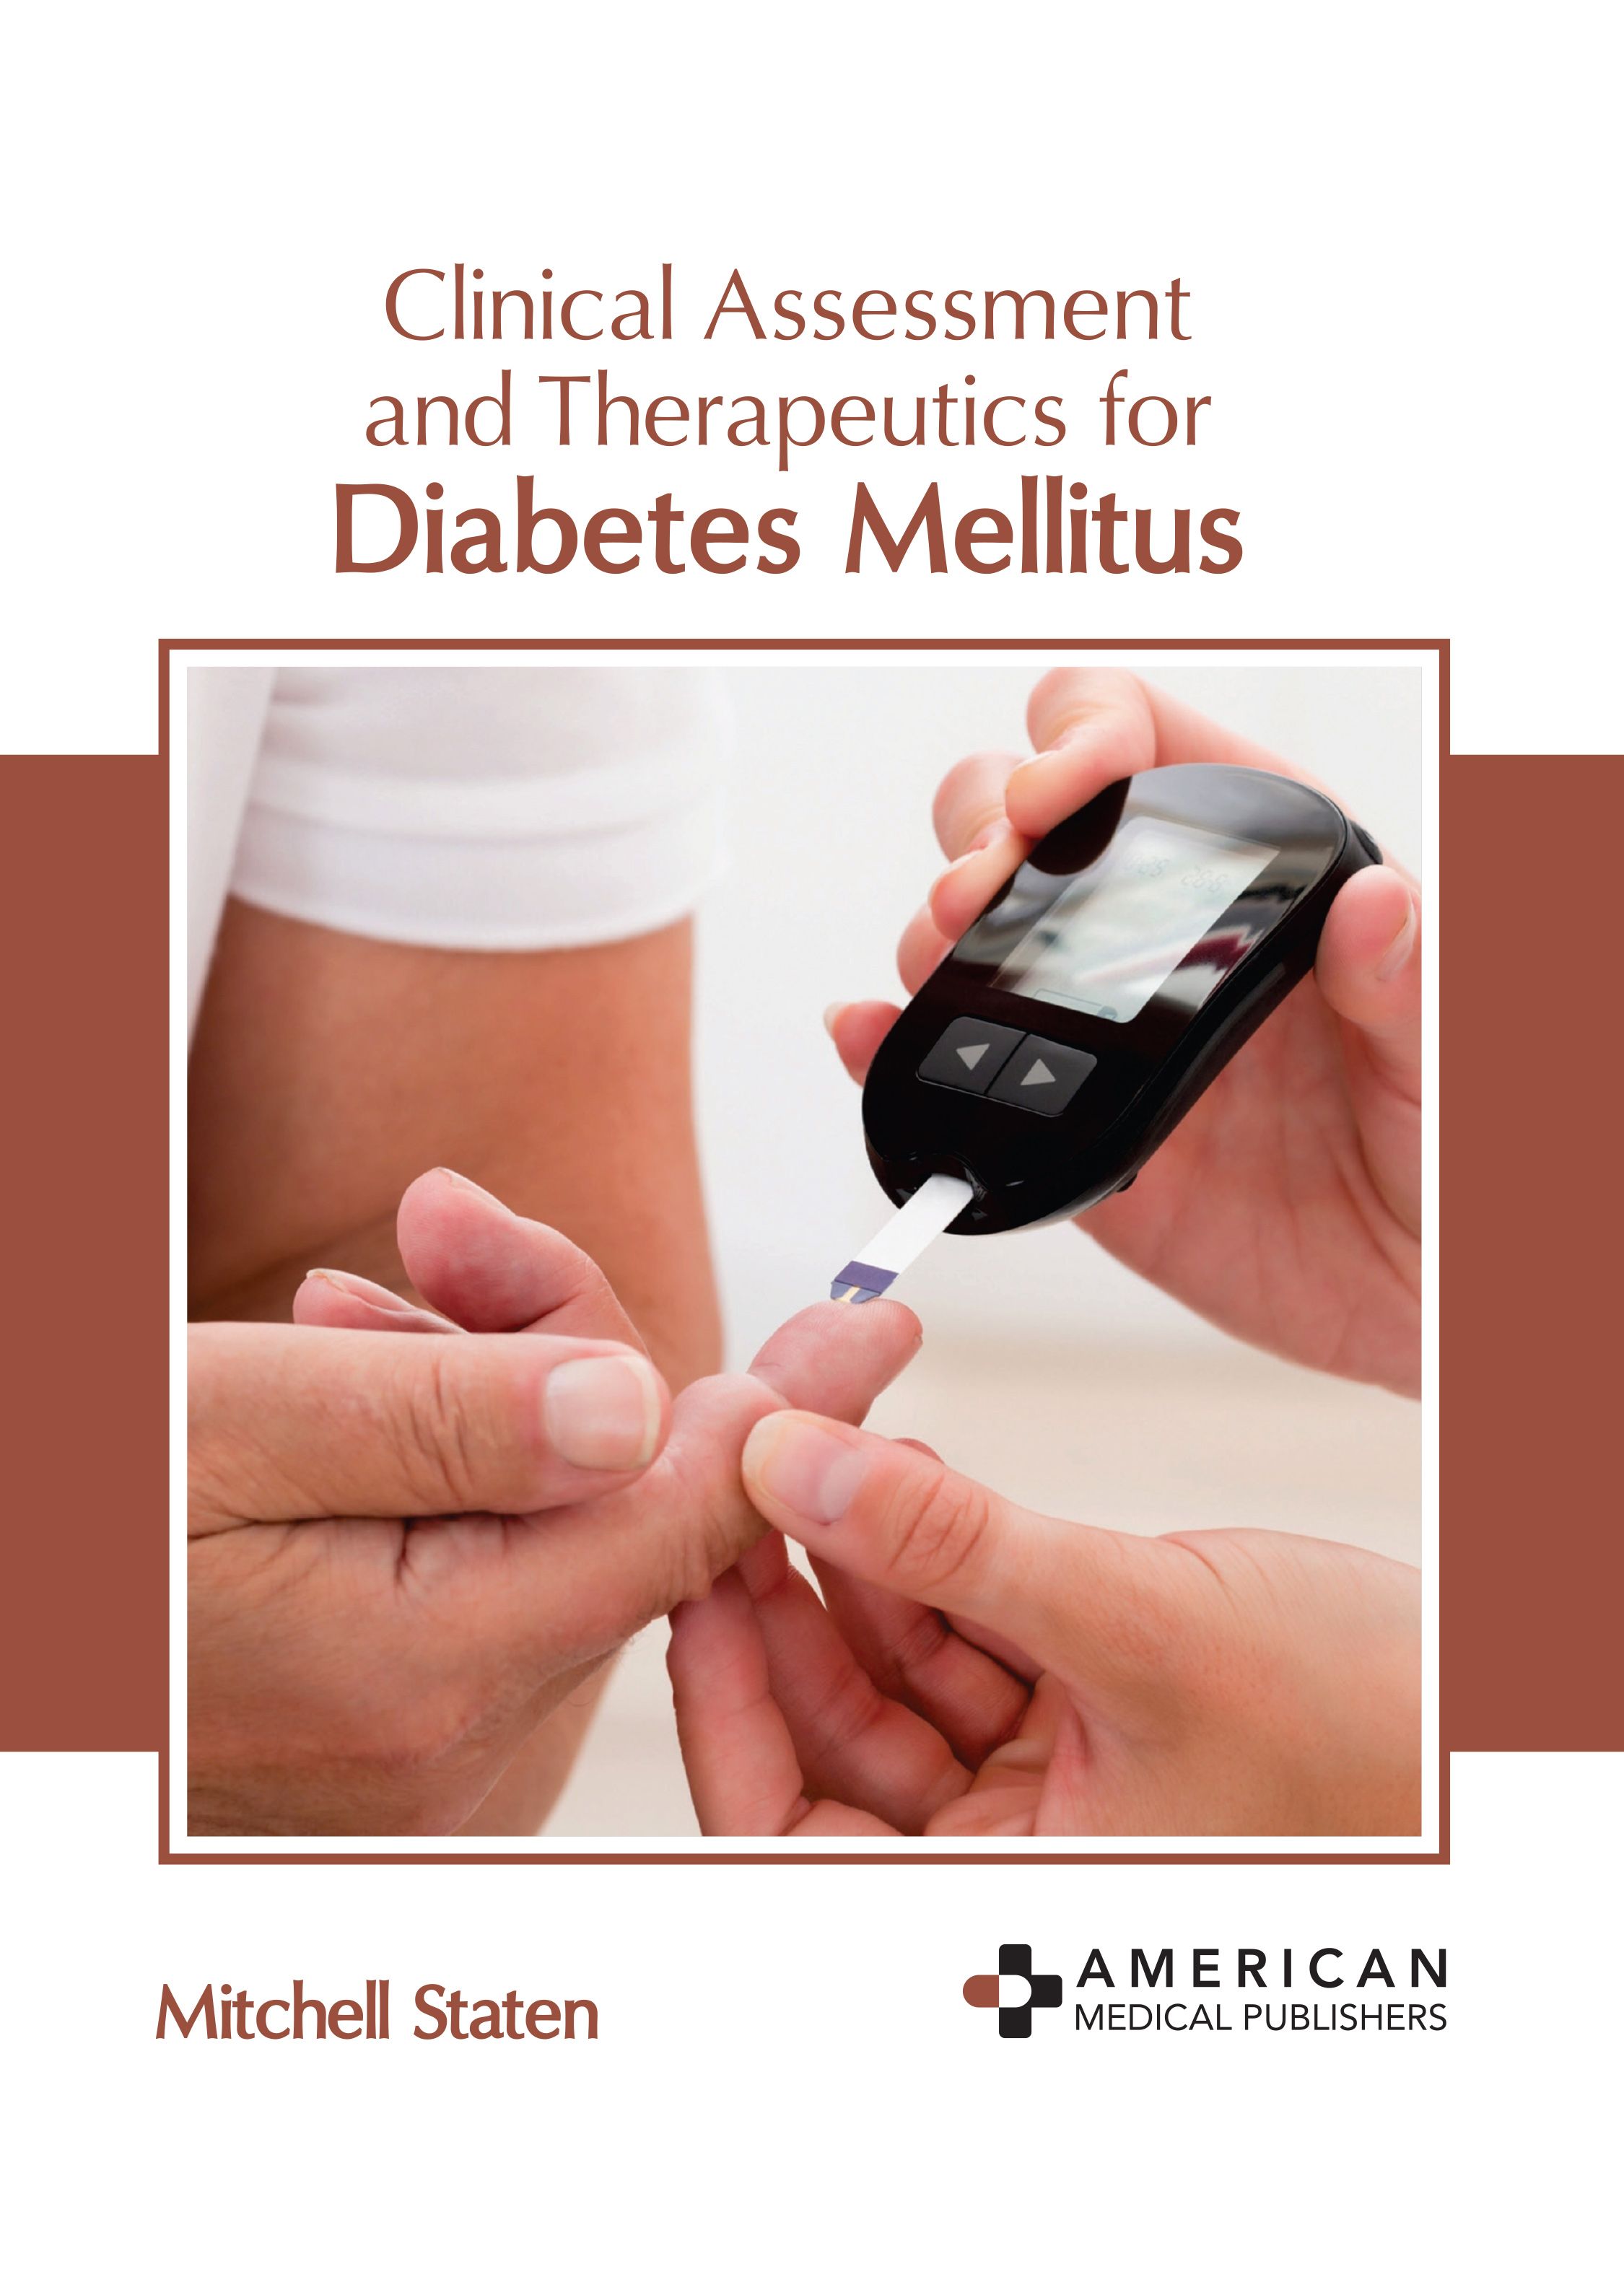 CLINICAL ASSESSMENT AND THERAPEUTICS FOR DIABETES MELLITUS